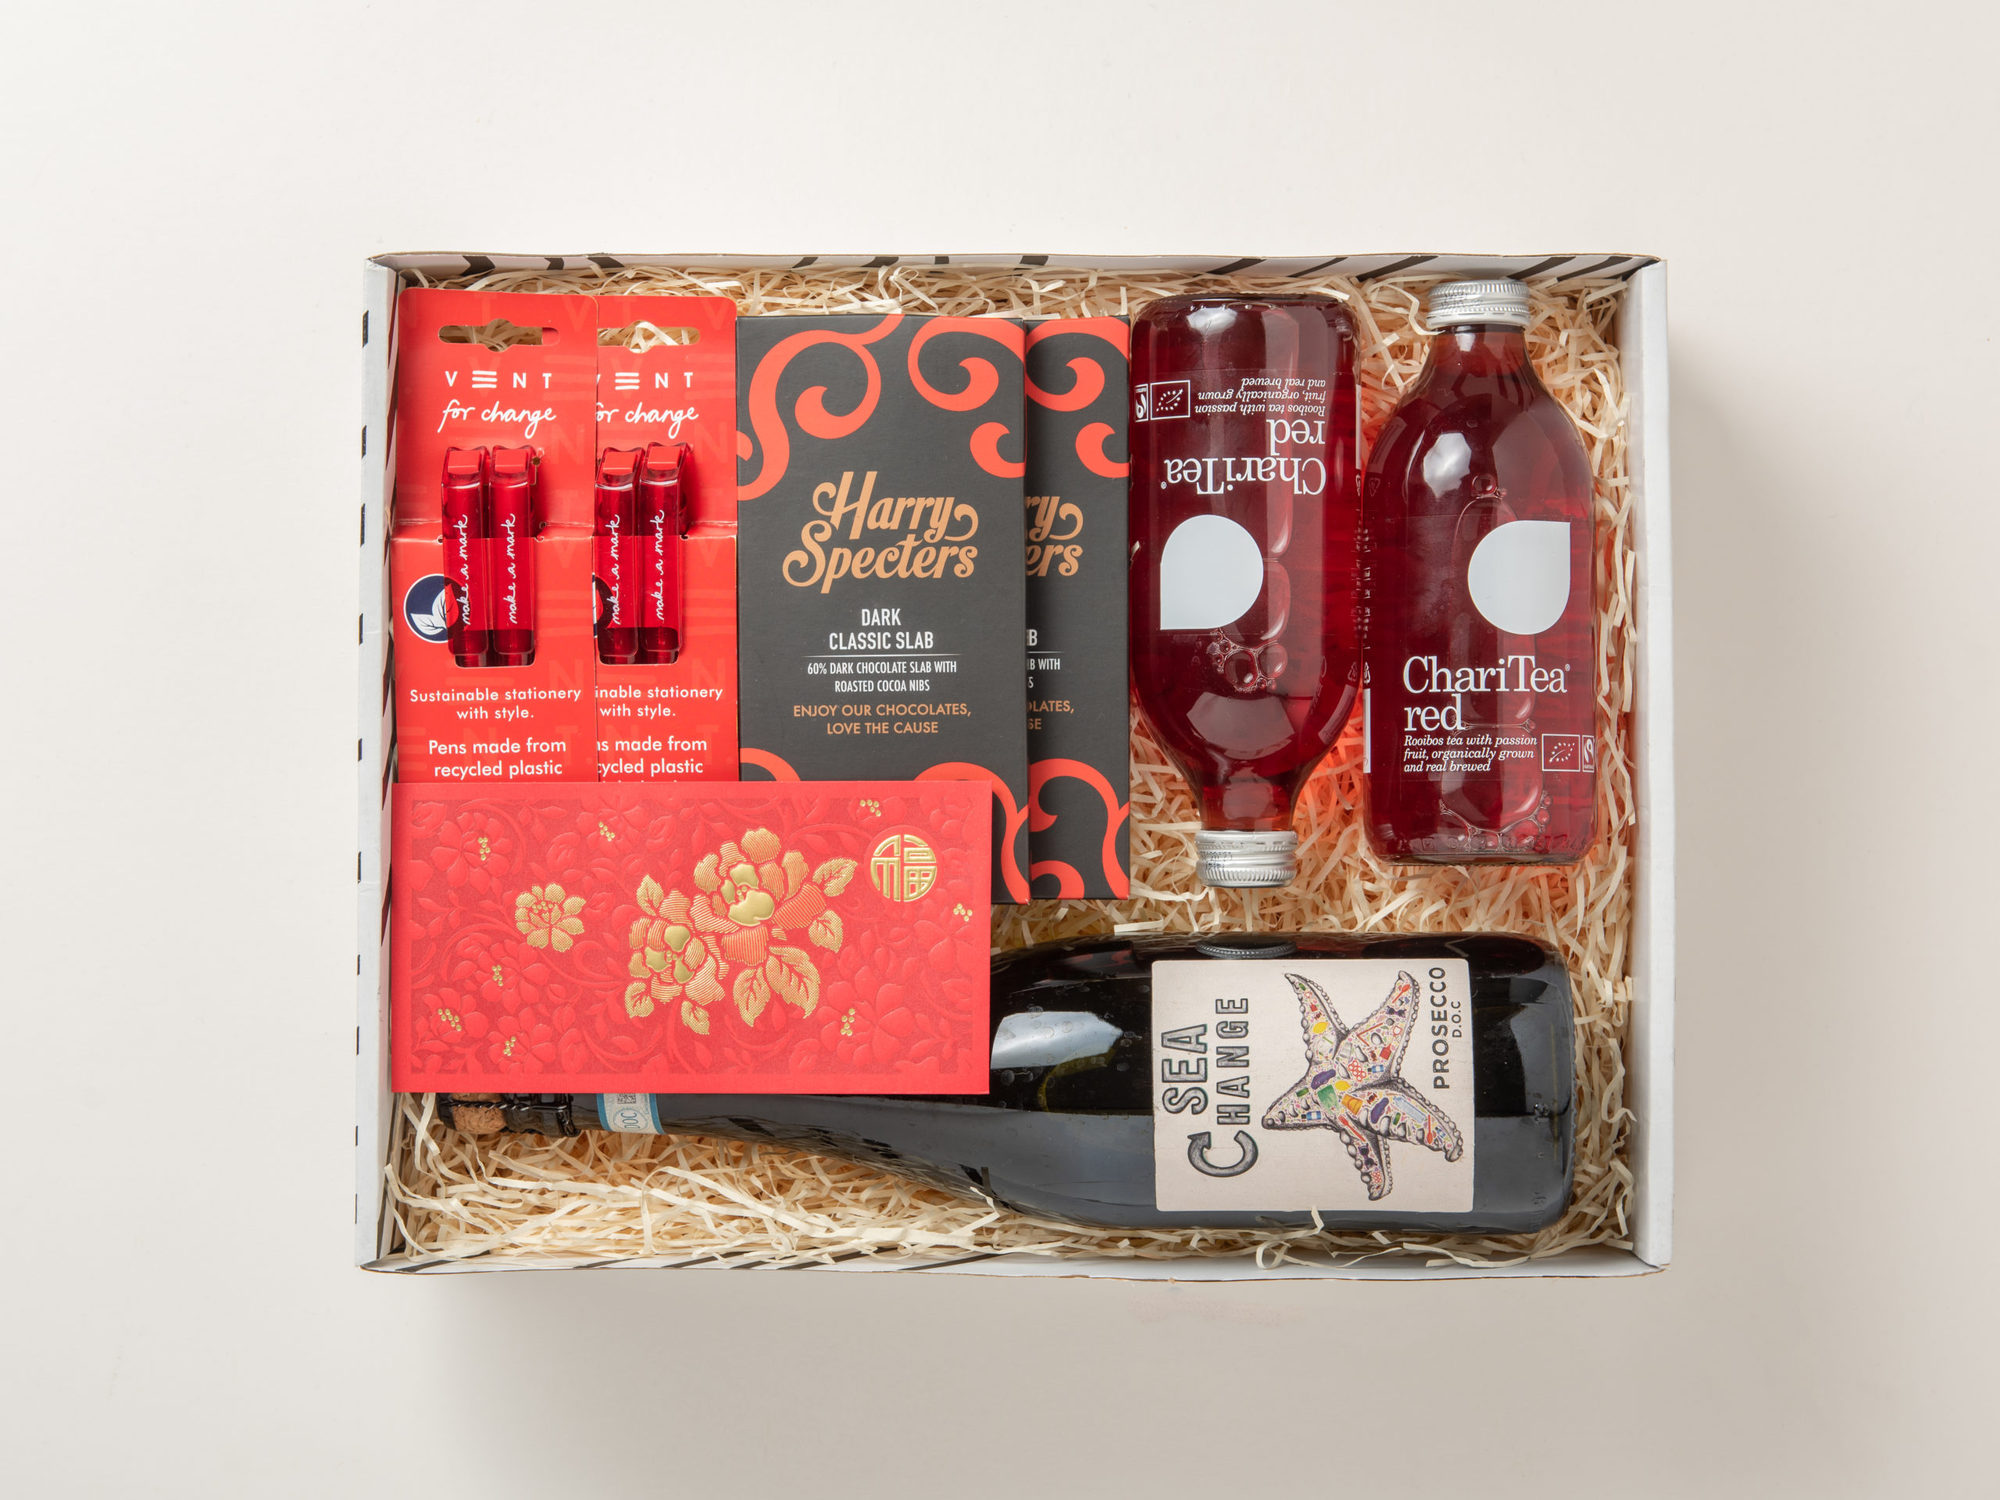 Ethical marketplace Social Supermarket launches a Chinese New Year Hamper to celebrate the Year of the Tiger Featured Image